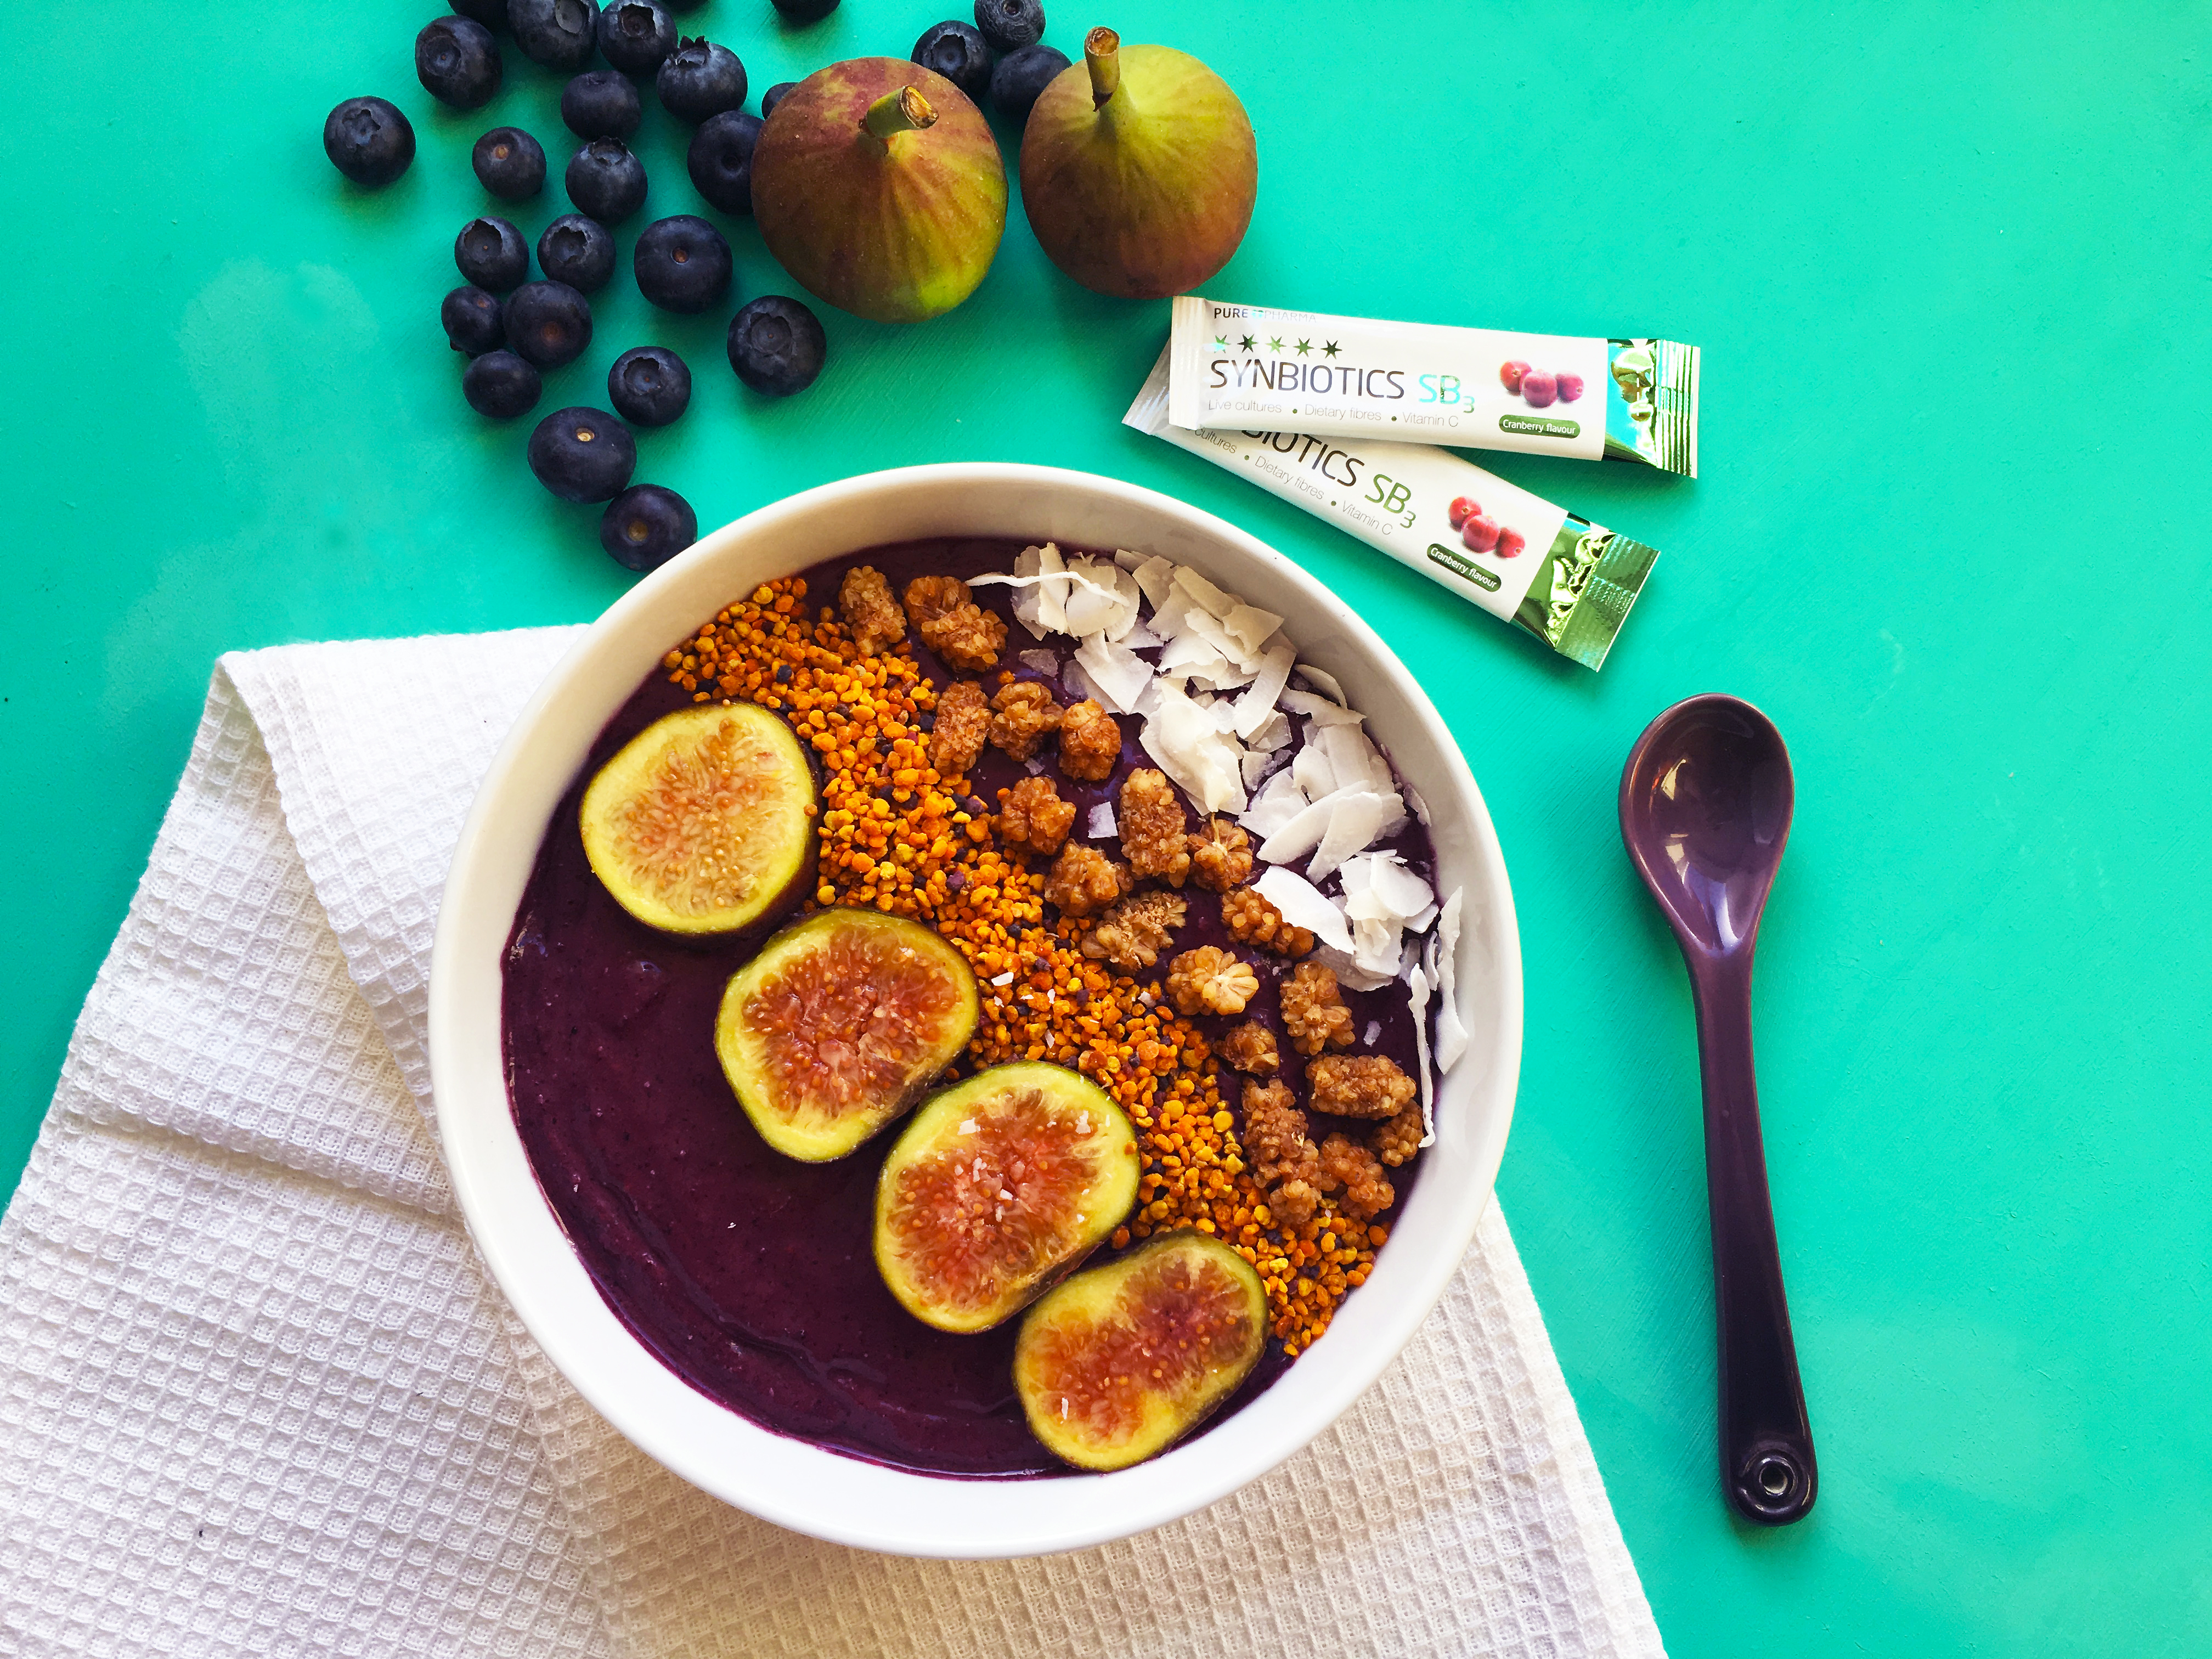 Blueberry and Acai Probiotic Smoothie Bowl